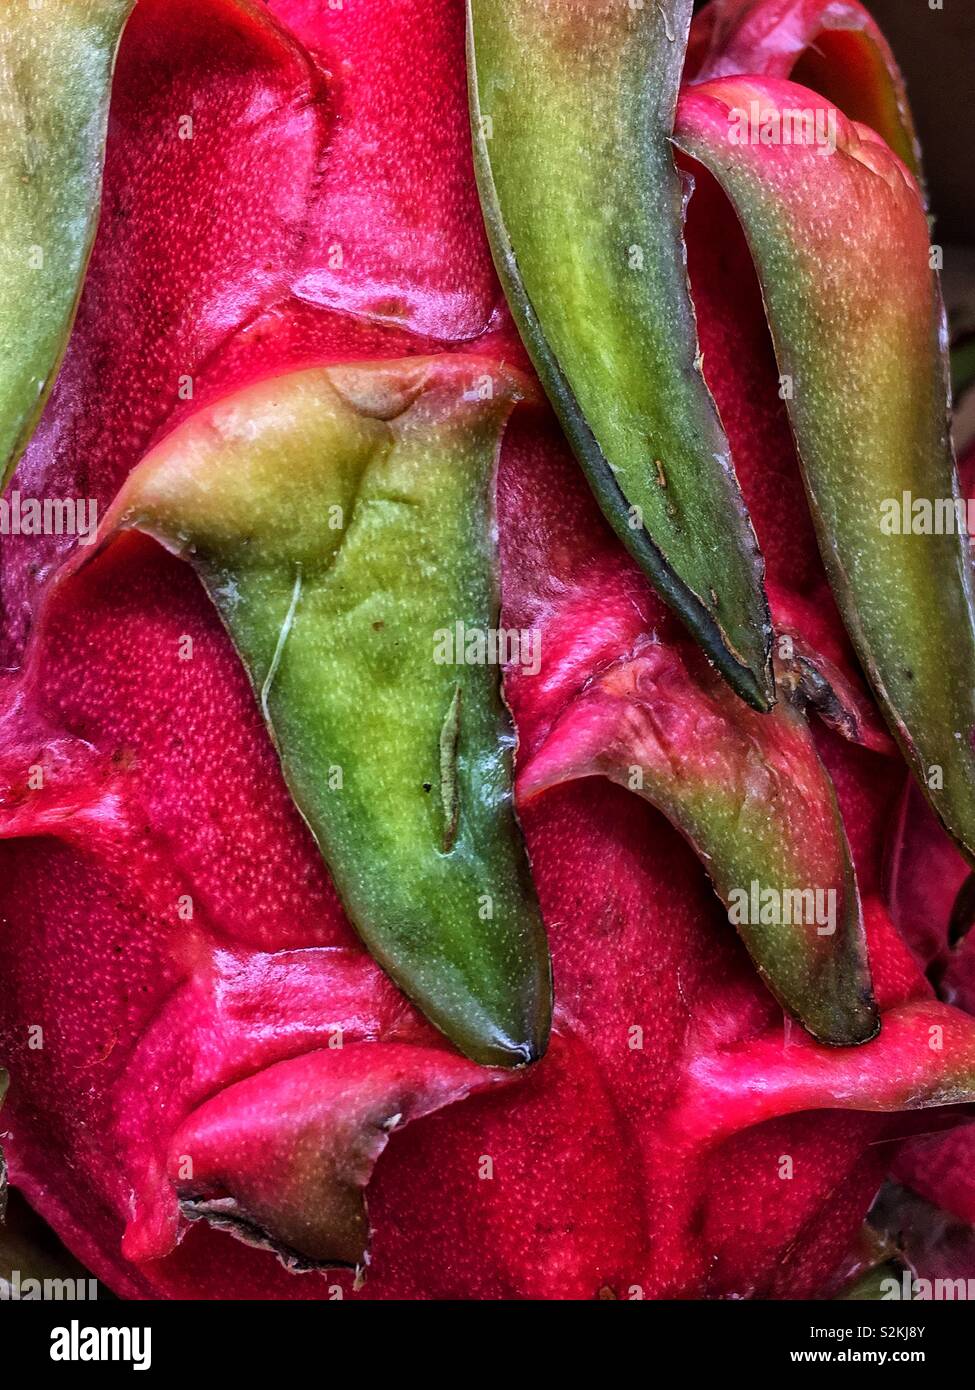 Full frame closeup of fresh delicious ripe perfect dragon fruit, thang, Hylocereus, pitahaya, pitaya, pitaya roja, strawberry pear on display and for sale at the local produce market. Stock Photo